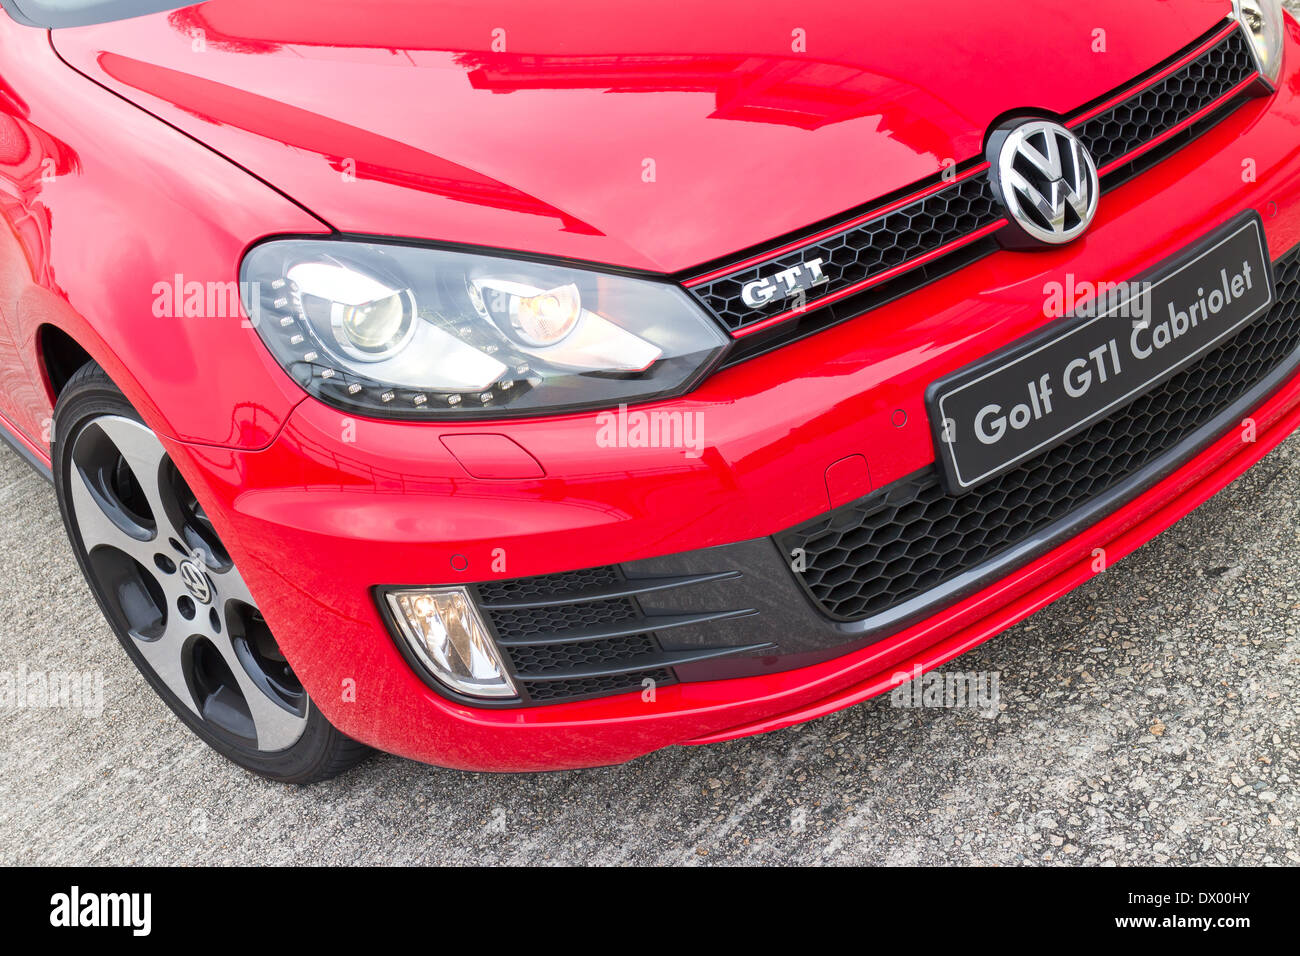 Volkswagen Golf GTI Cabriolet 2013 Model with red colour Stock Photo ...